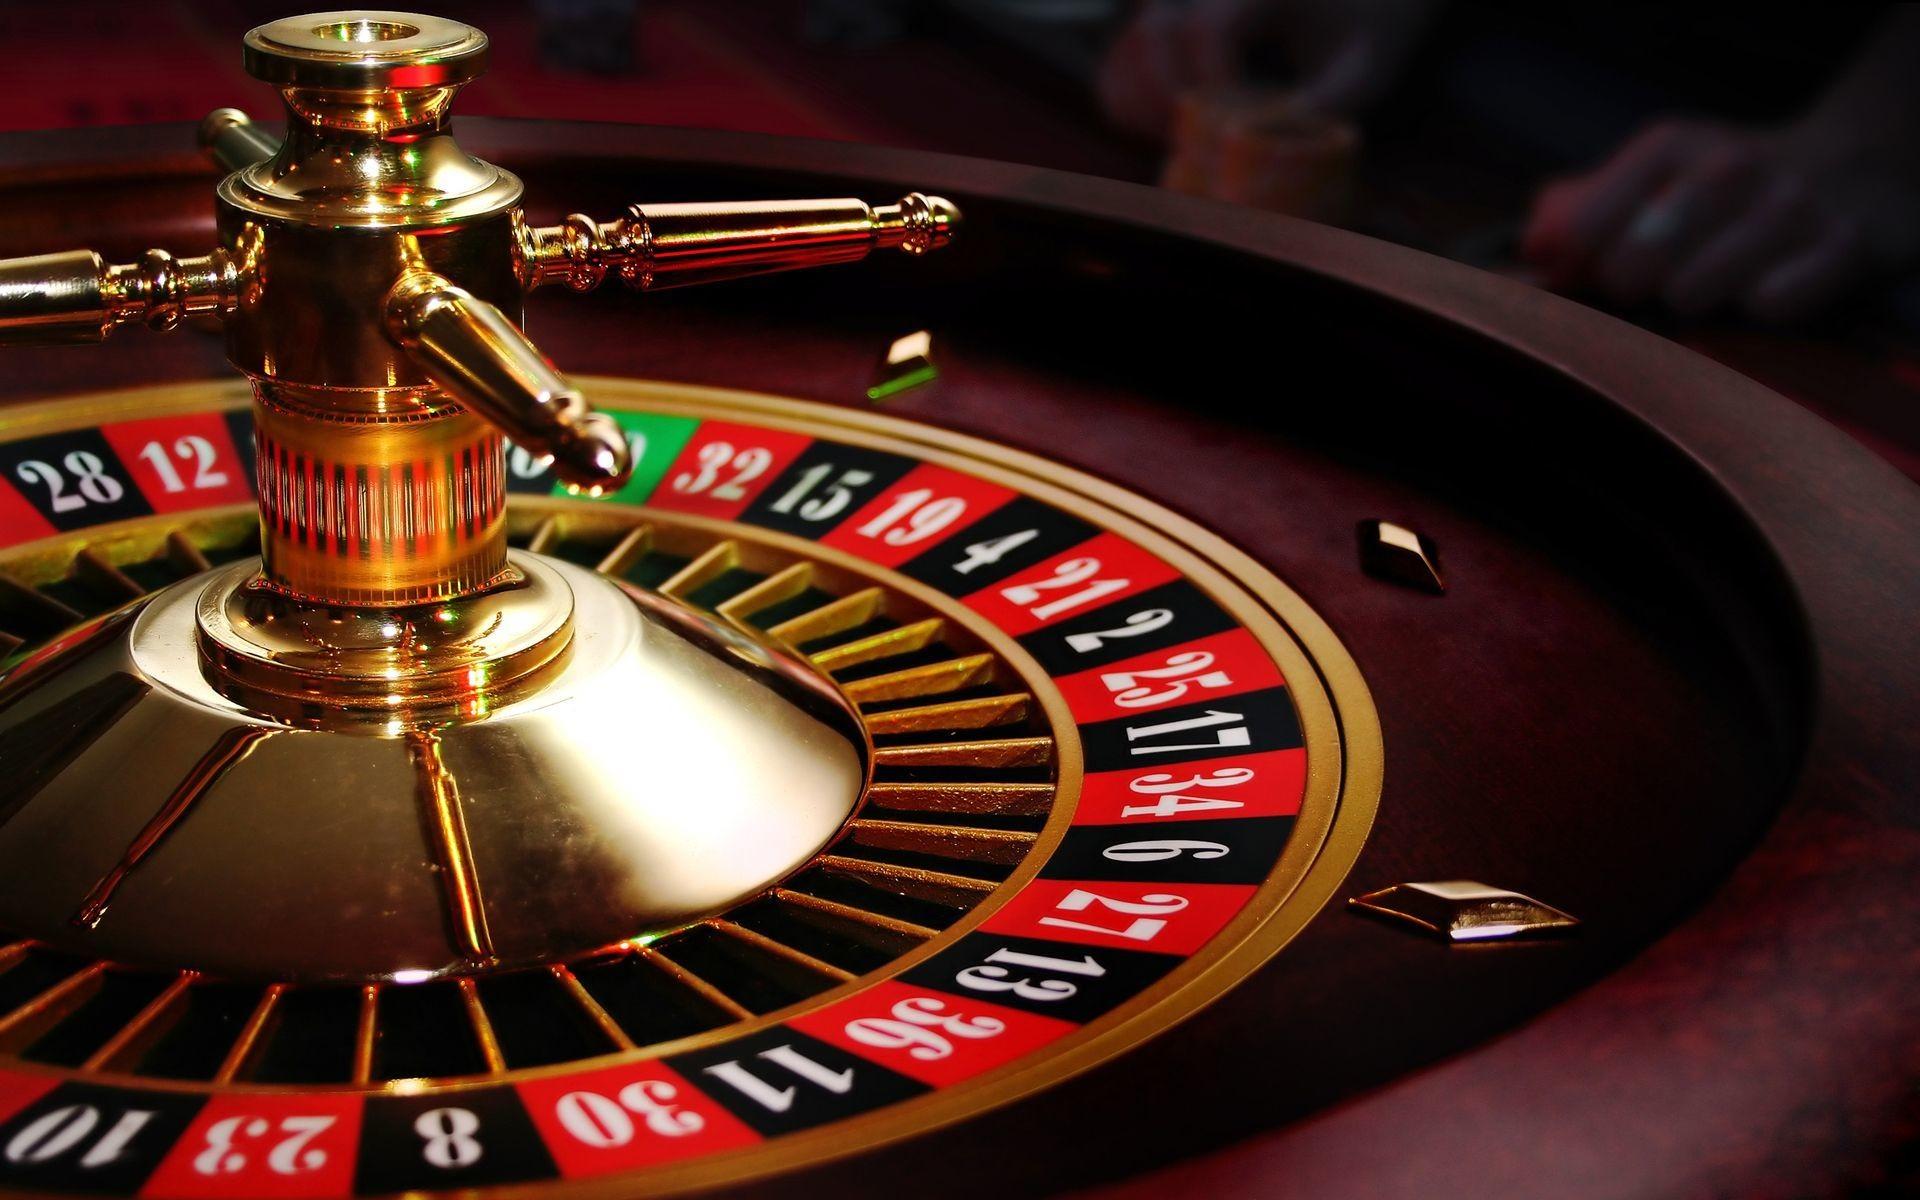 Want To Play Gambling Games With Friends? Go For Online Gambling Games